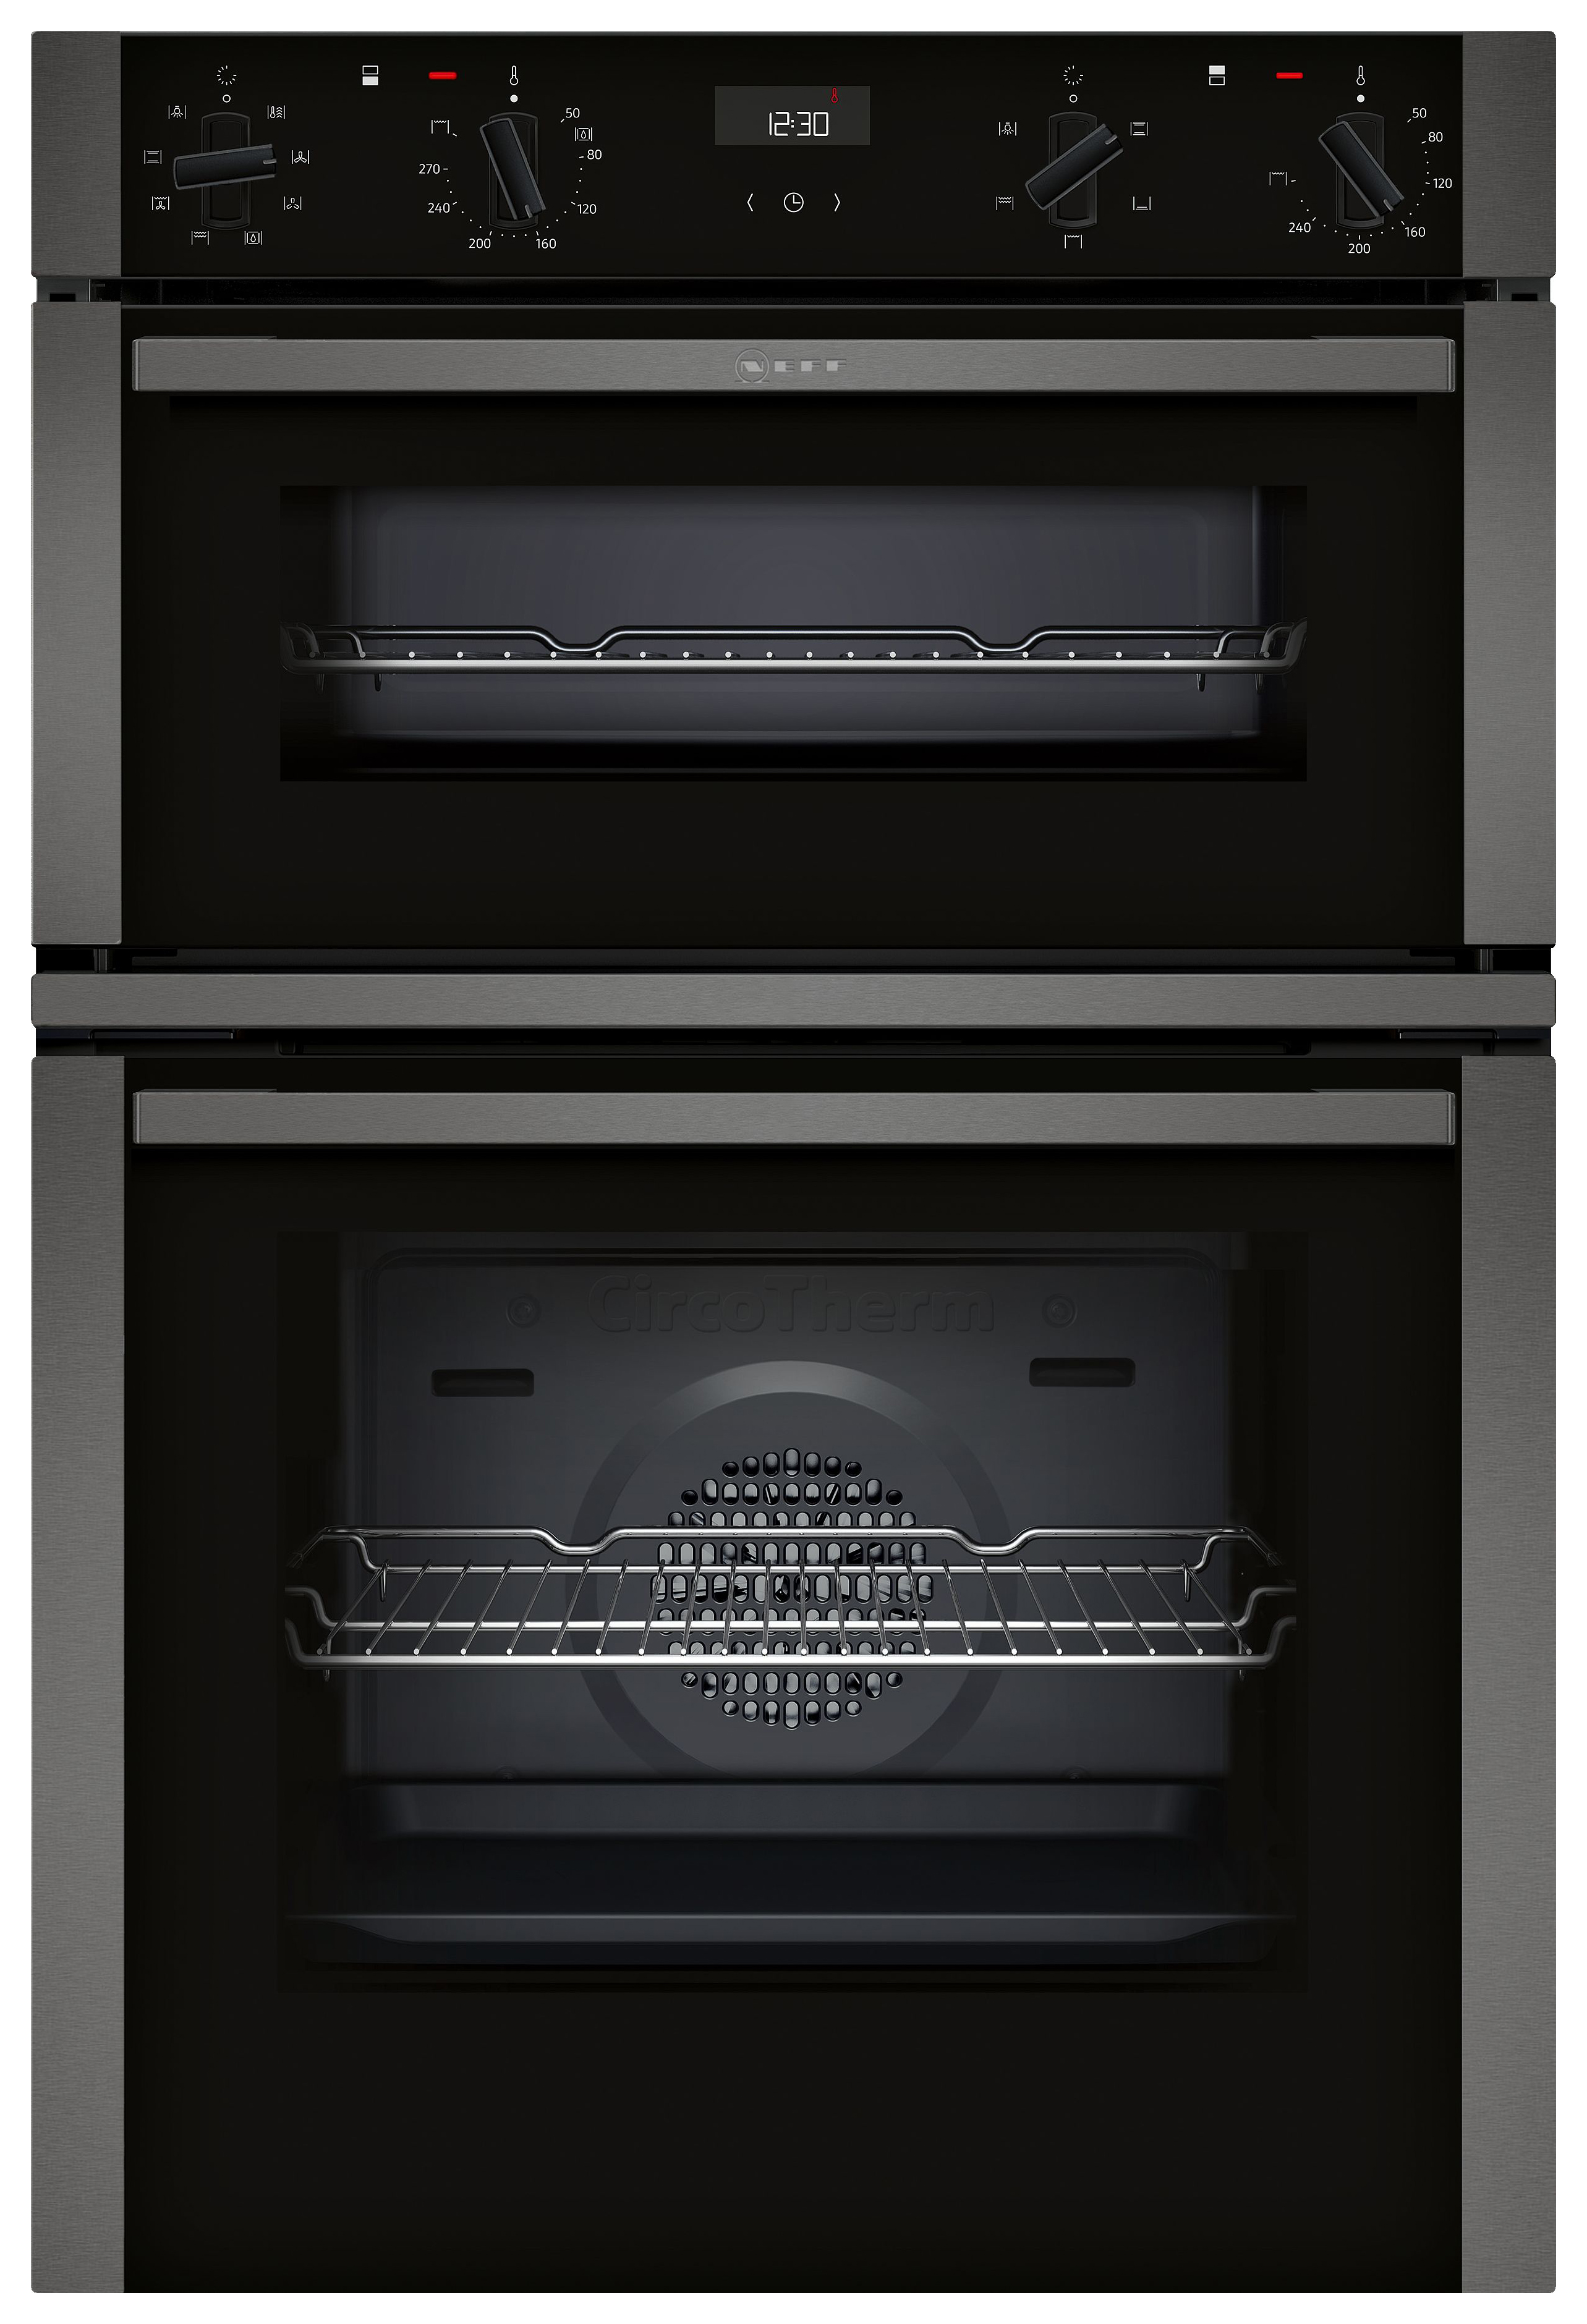 NEFF U1ACE2HG0B N50 Built-In Double Oven - Graphite Grey